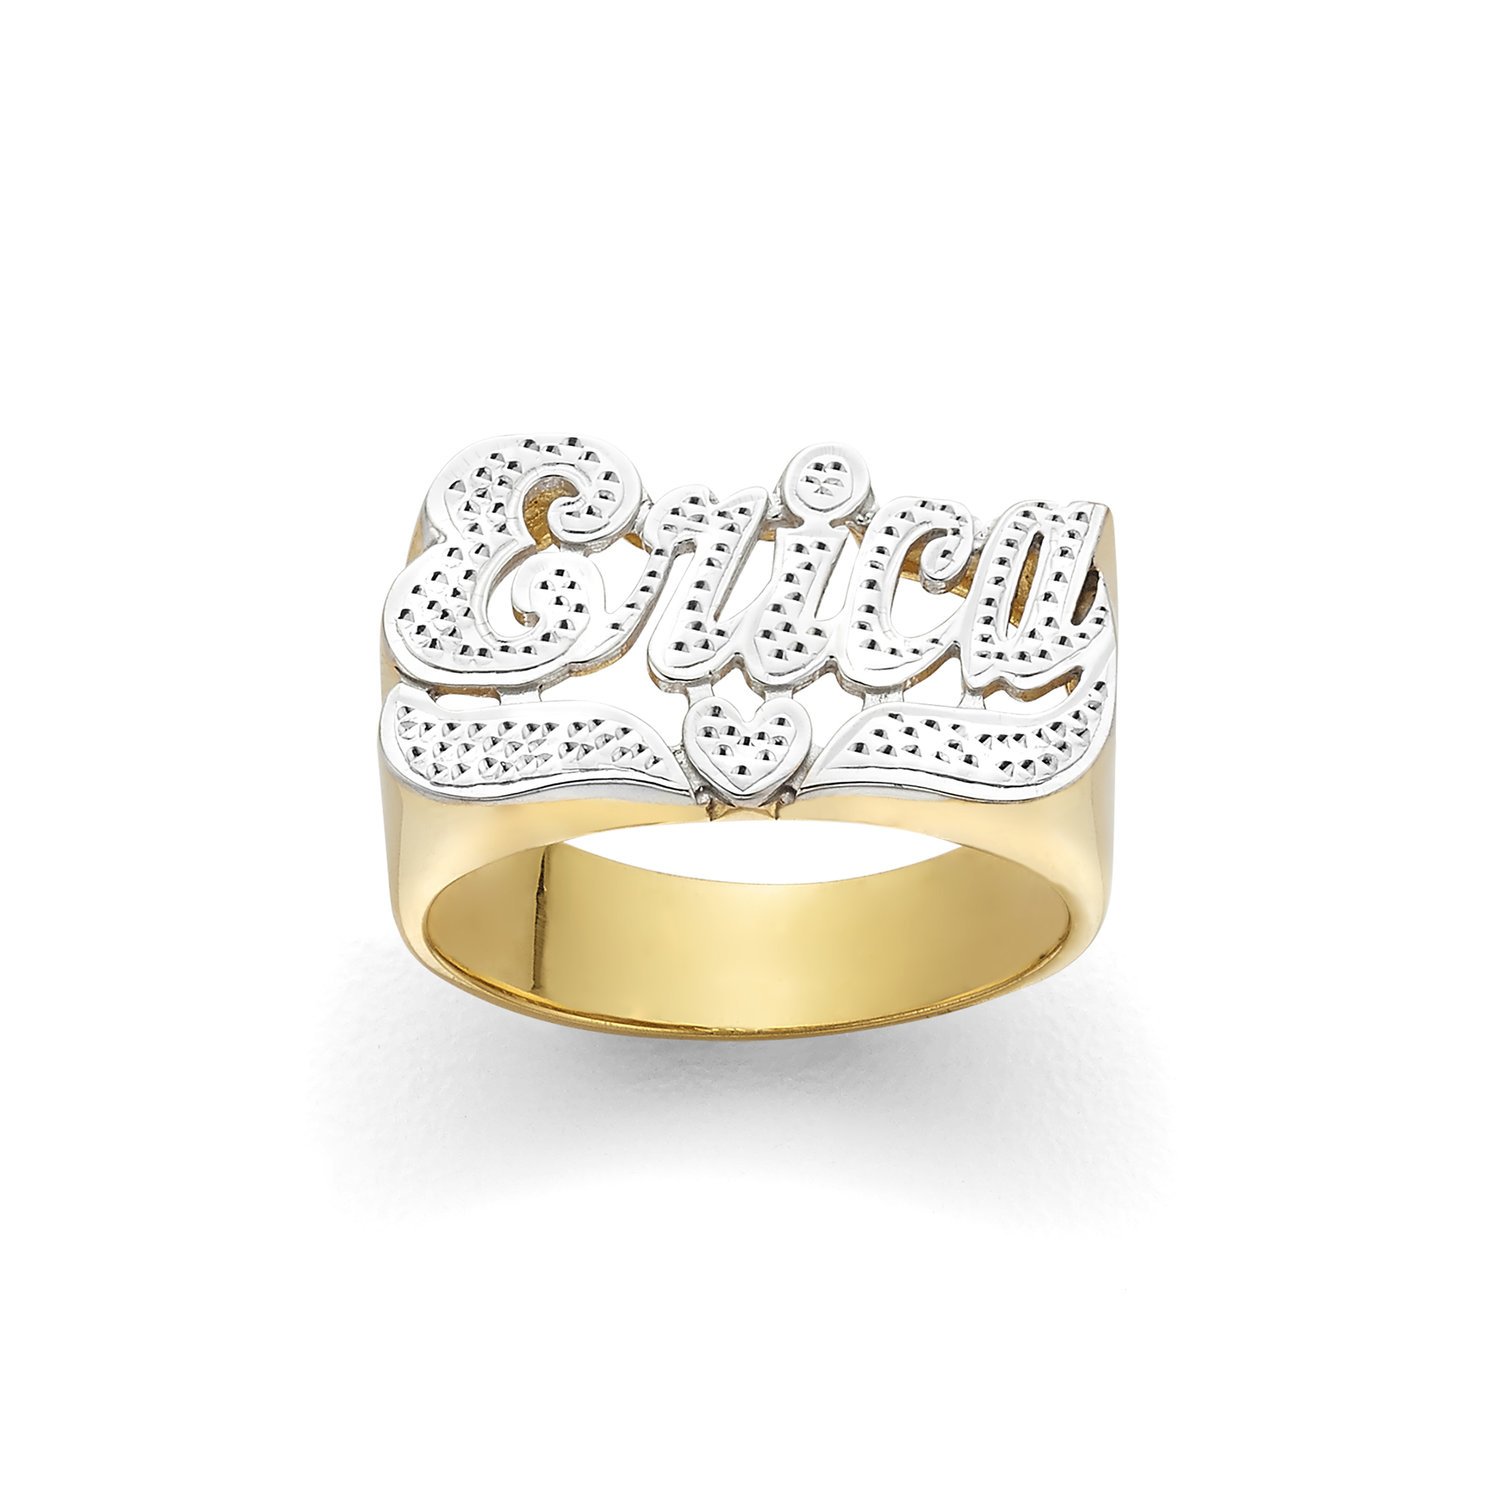 Two Tone 18K Gold Plated Personalized Name Ring with Heart